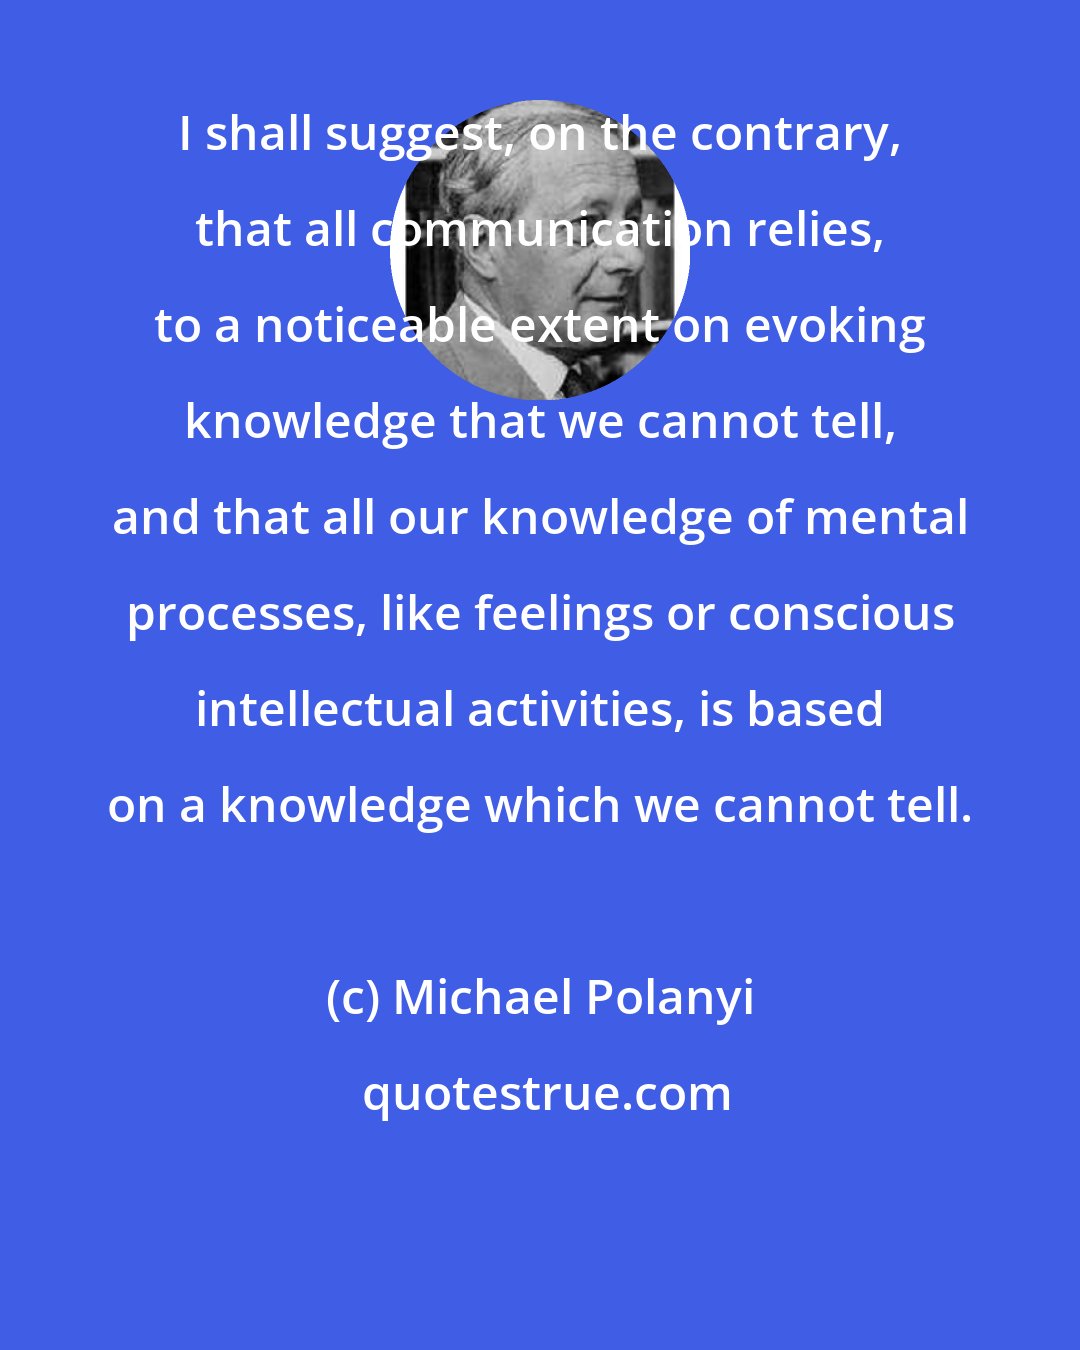 Michael Polanyi: I shall suggest, on the contrary, that all communication relies, to a noticeable extent on evoking knowledge that we cannot tell, and that all our knowledge of mental processes, like feelings or conscious intellectual activities, is based on a knowledge which we cannot tell.